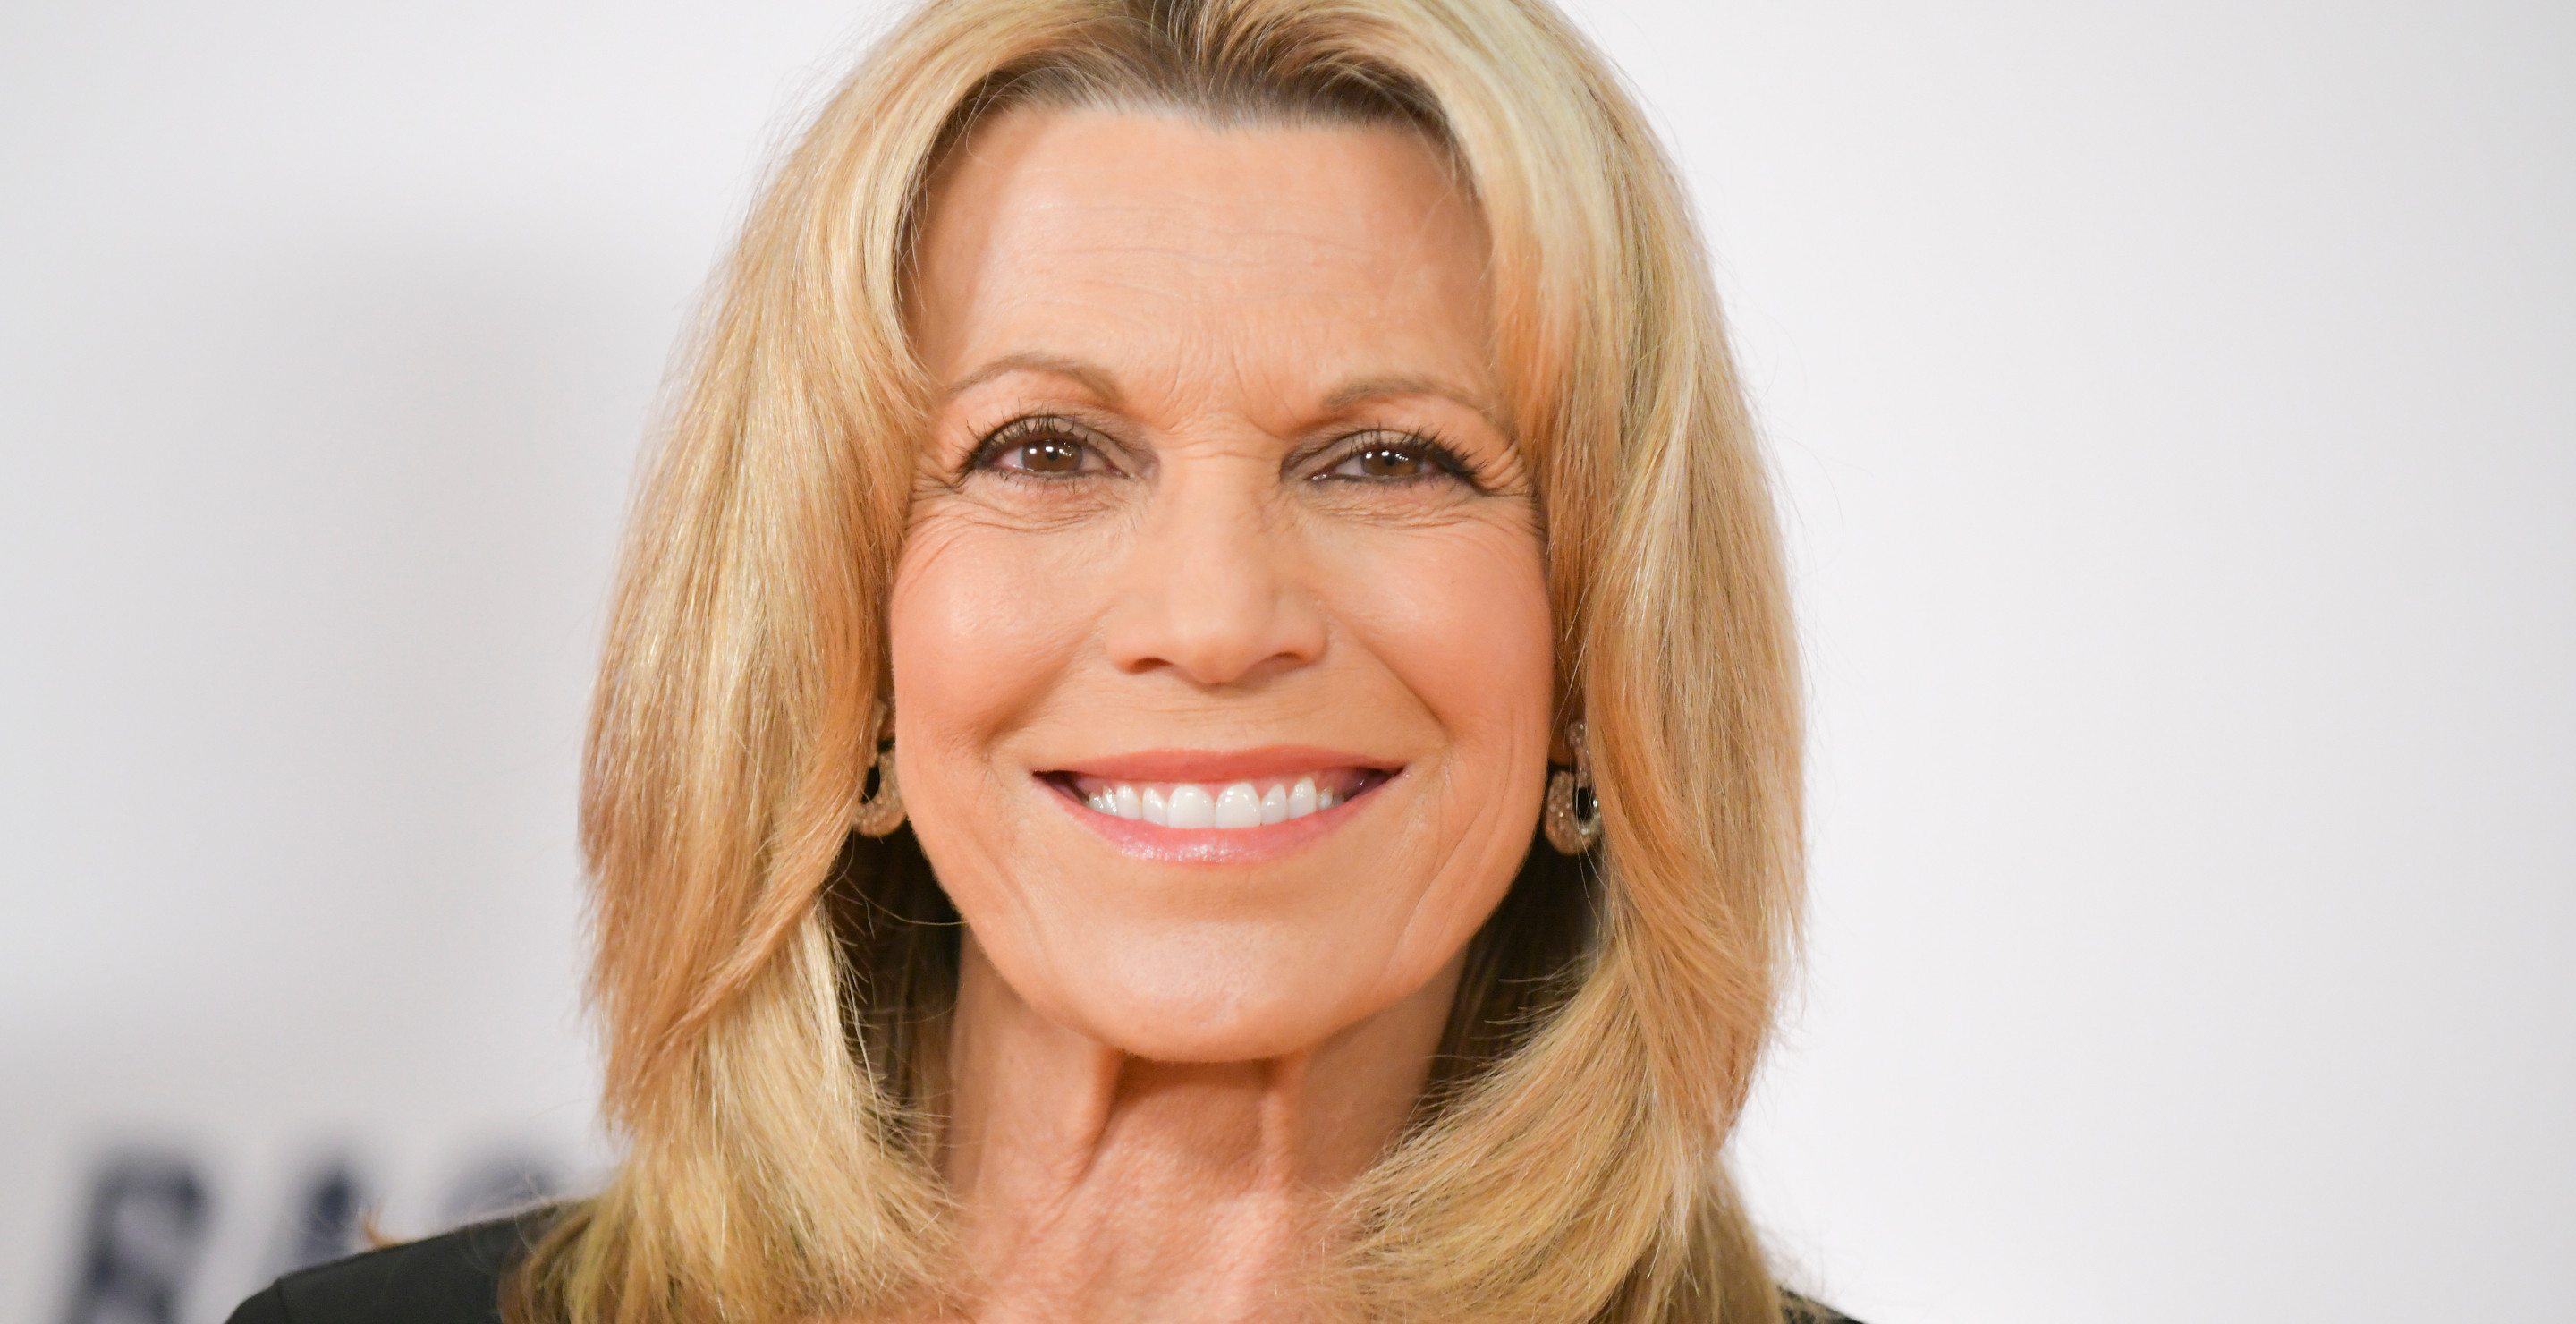 Vanna White May Be On Her Way Out At 'Wheel Of Fortune'